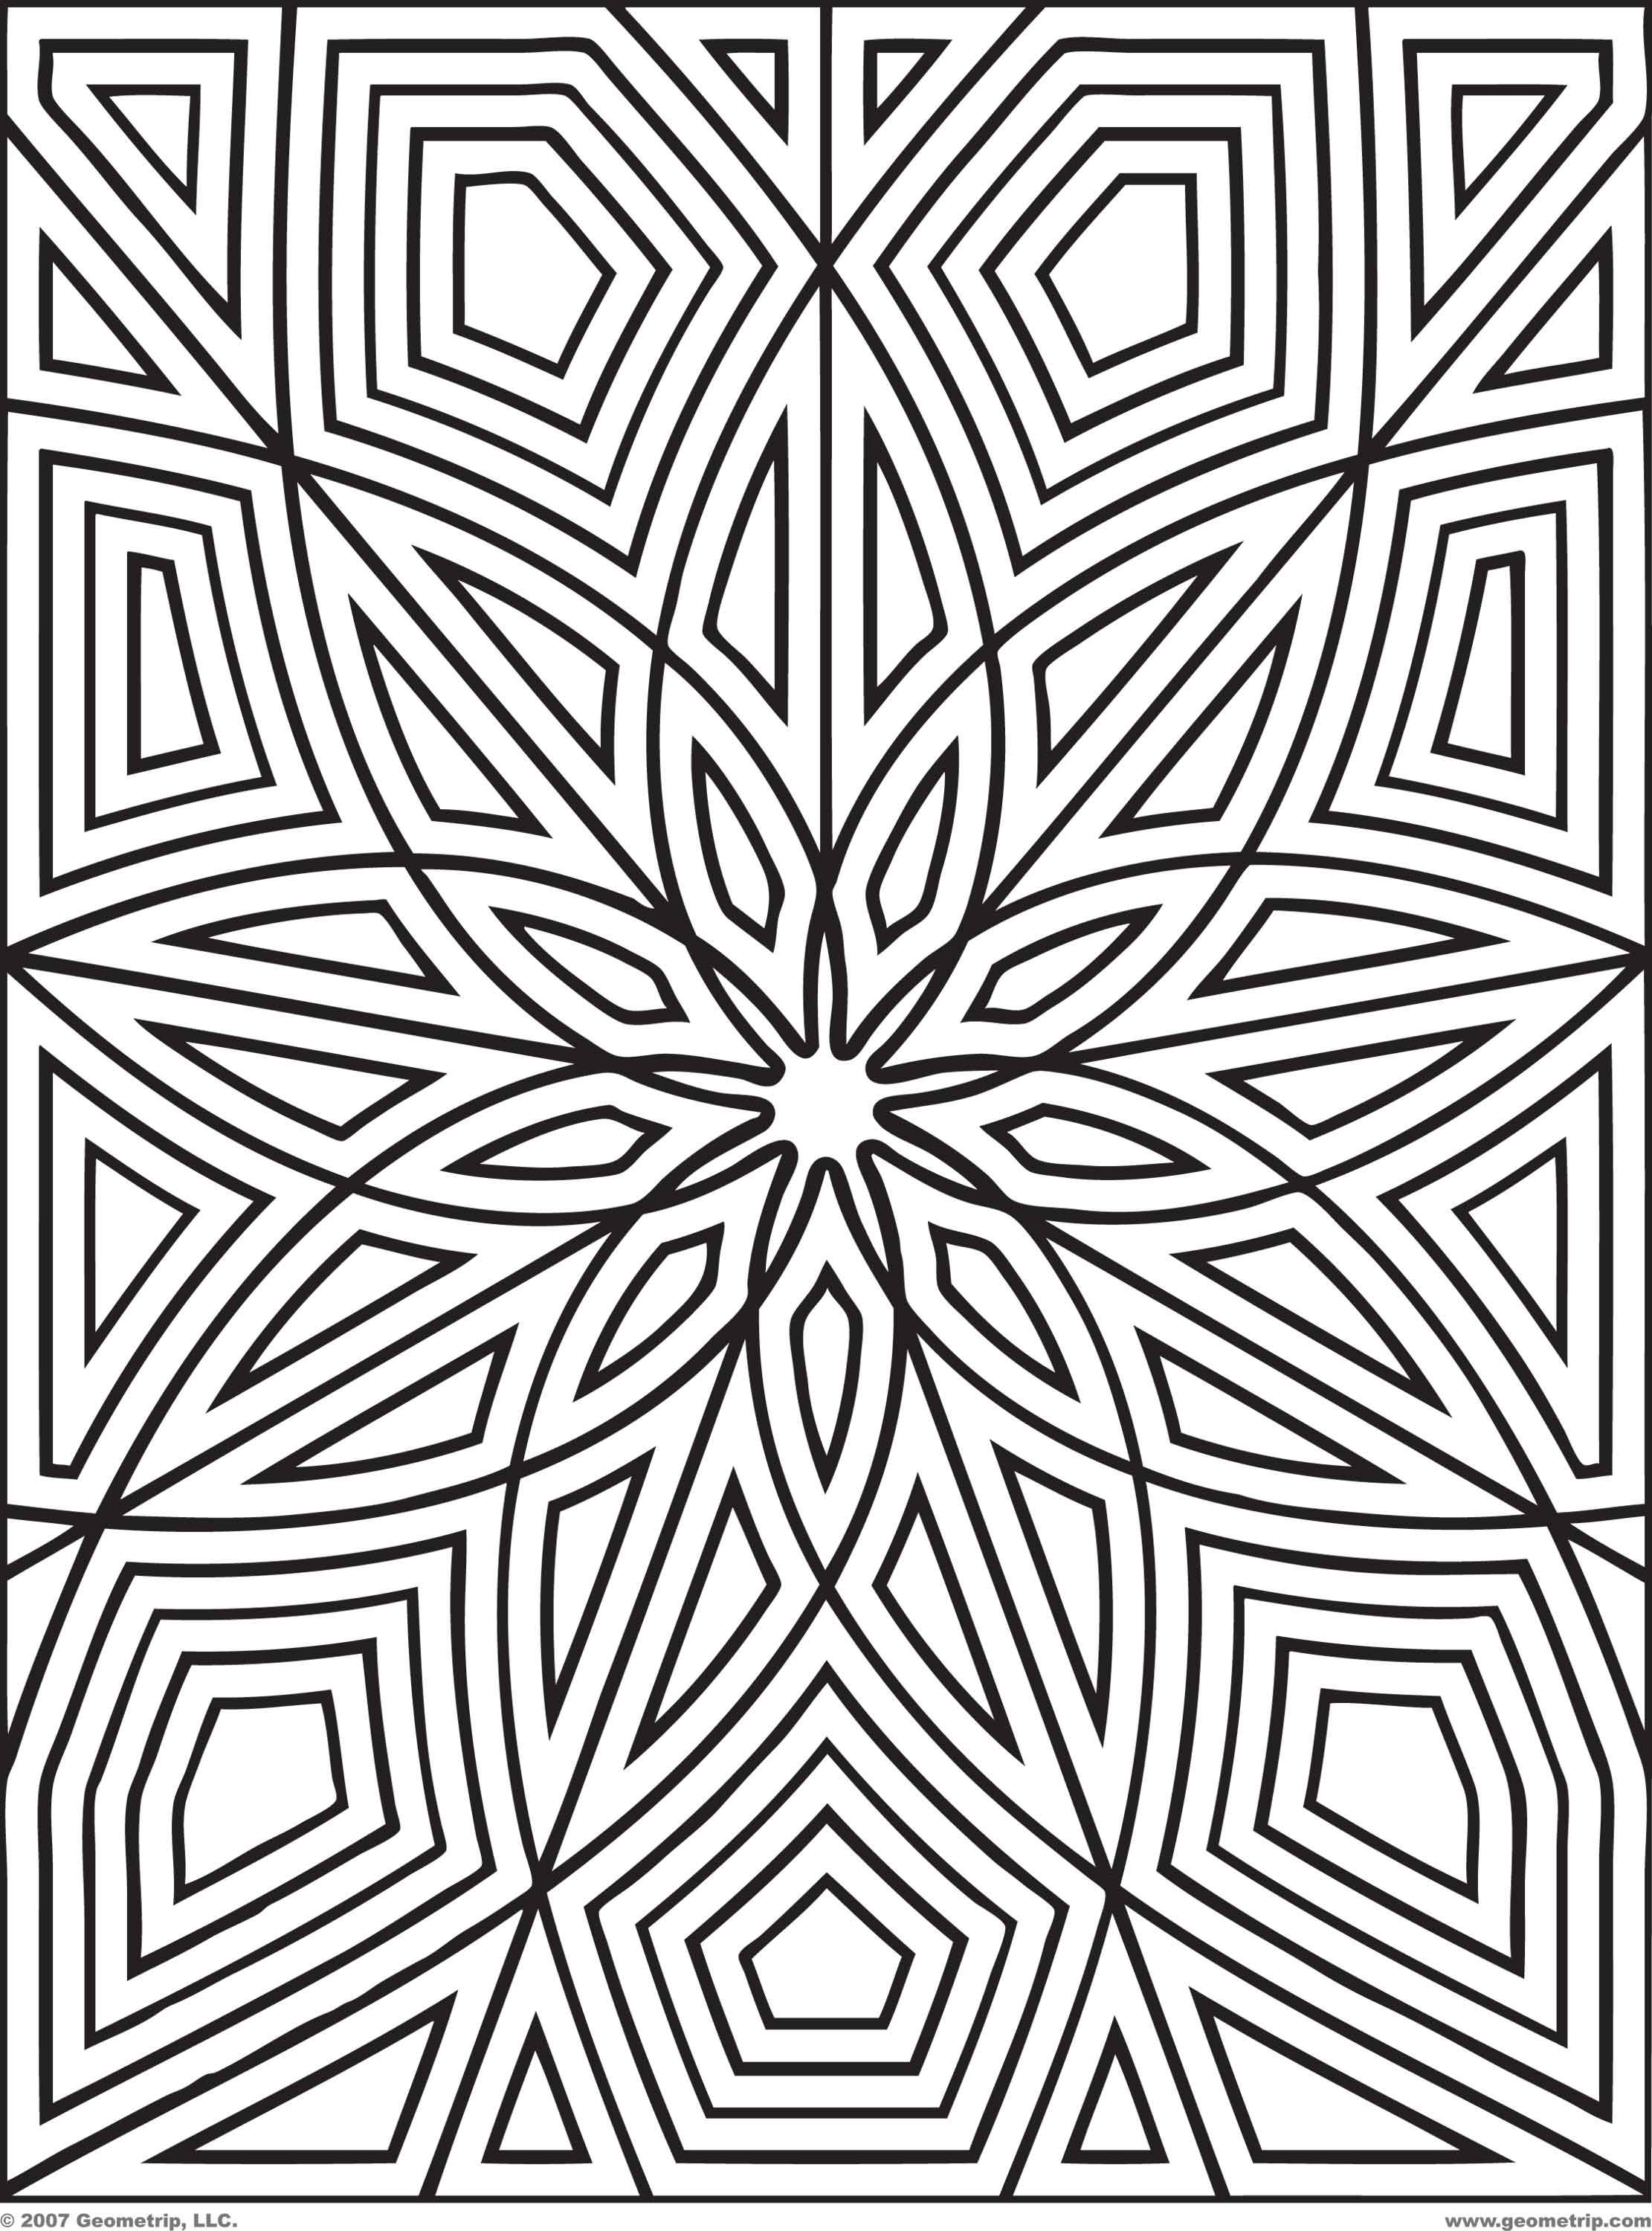 Coloring Pages Designs Free To Color - VoteForVerde.com